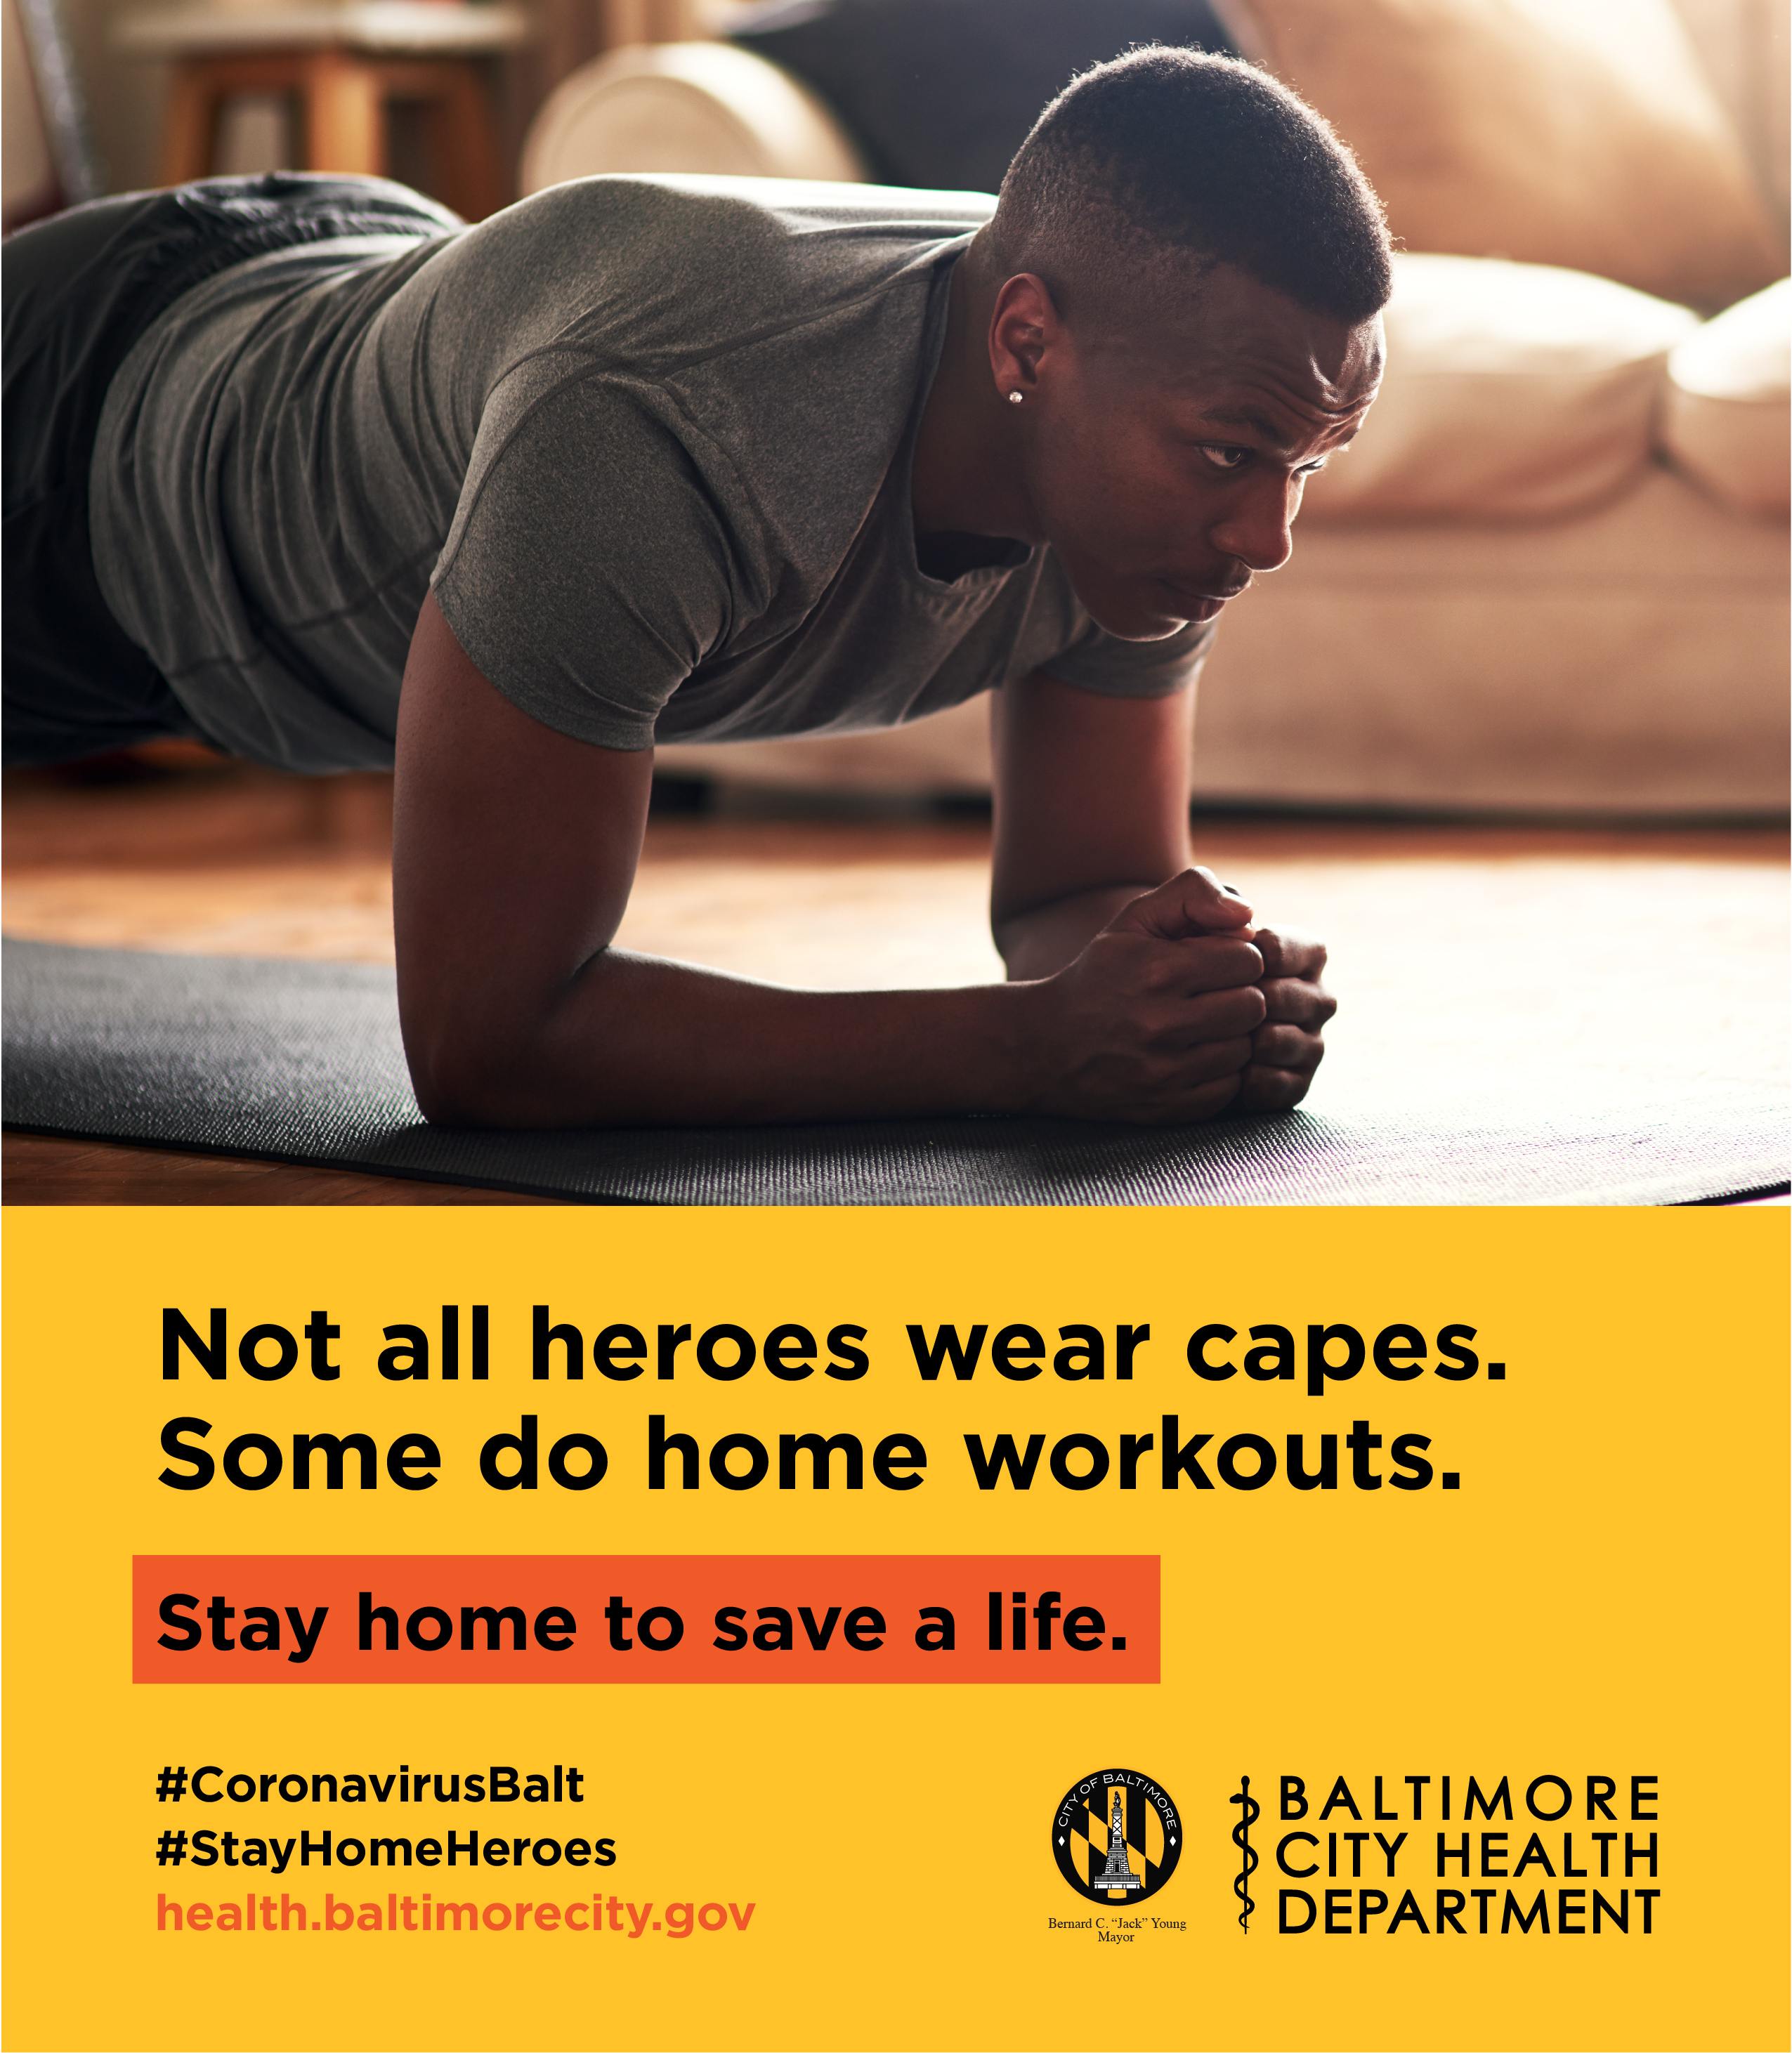 Not all heroes wear capes, some do home workouts. Stay home to save a life. 